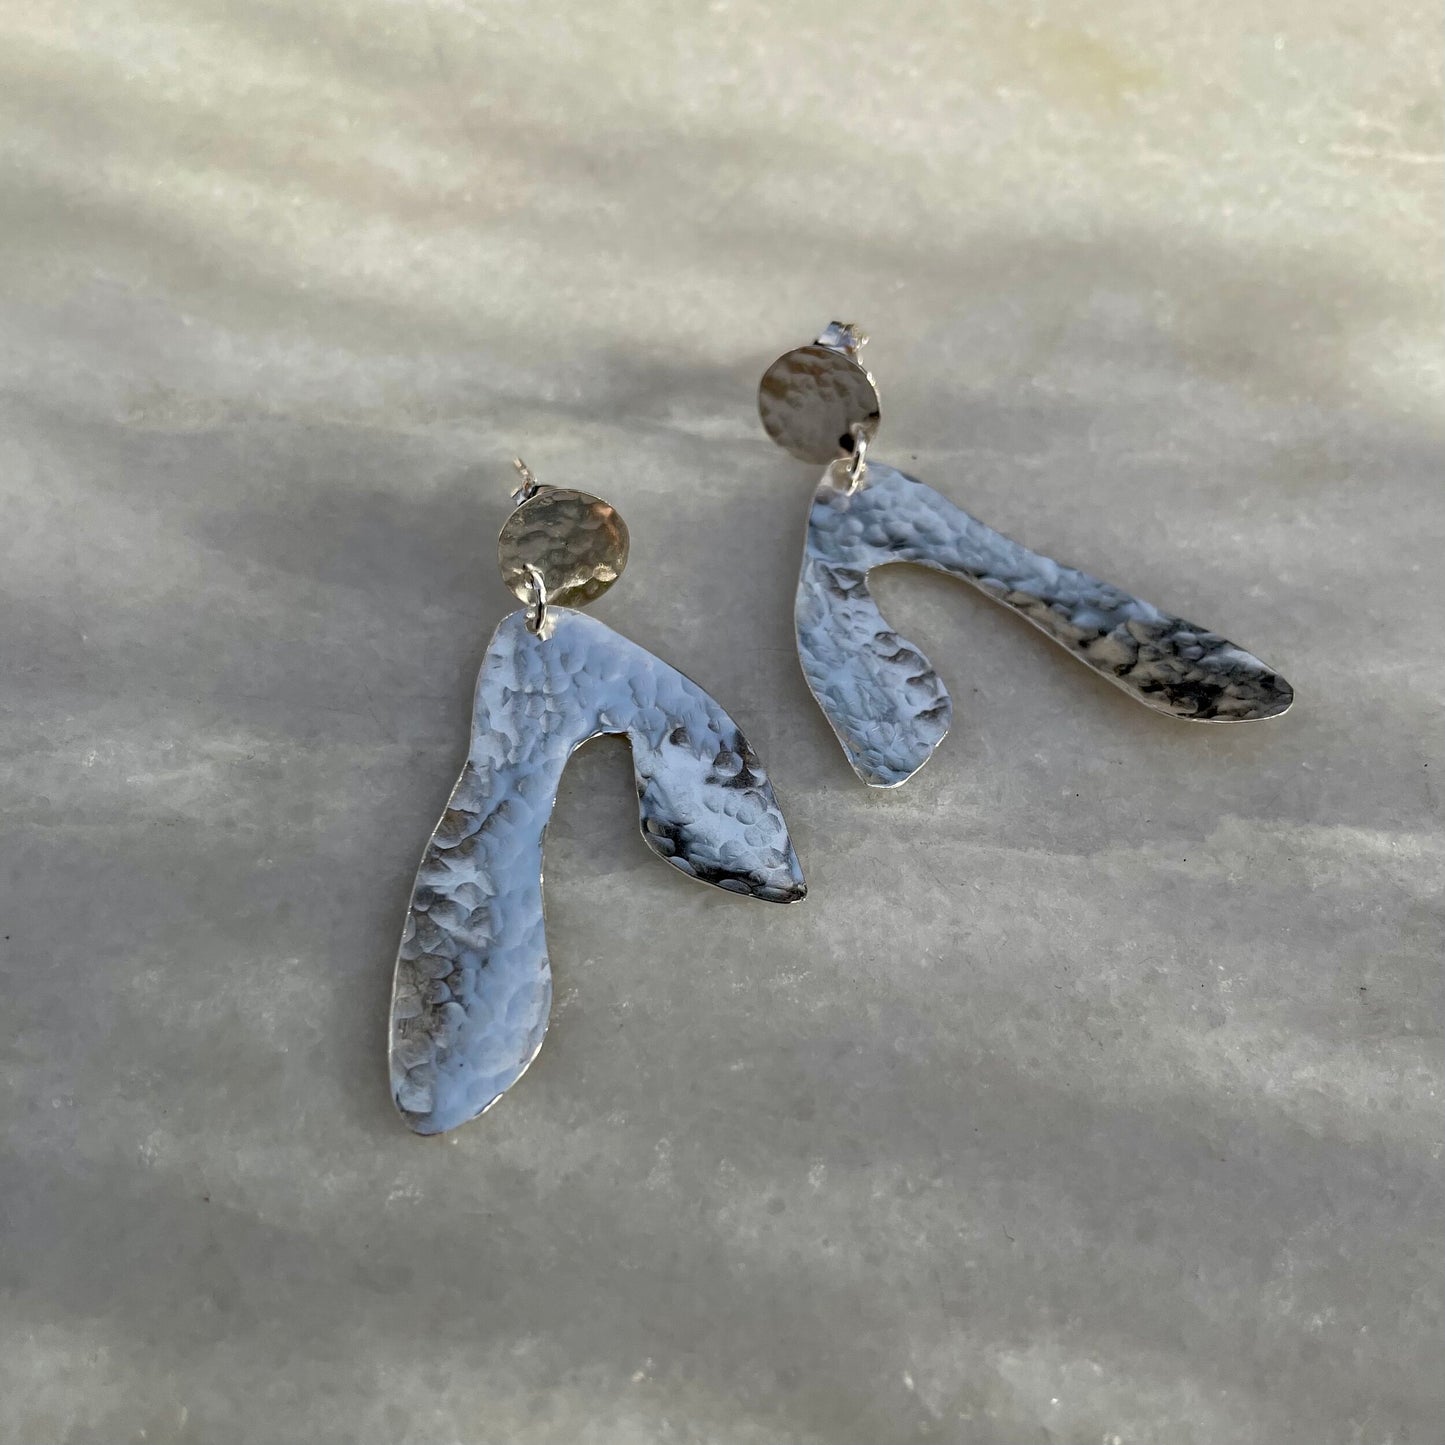 Sycamore Earrings: sycamore seed shaped earrings handmade in recycled silver